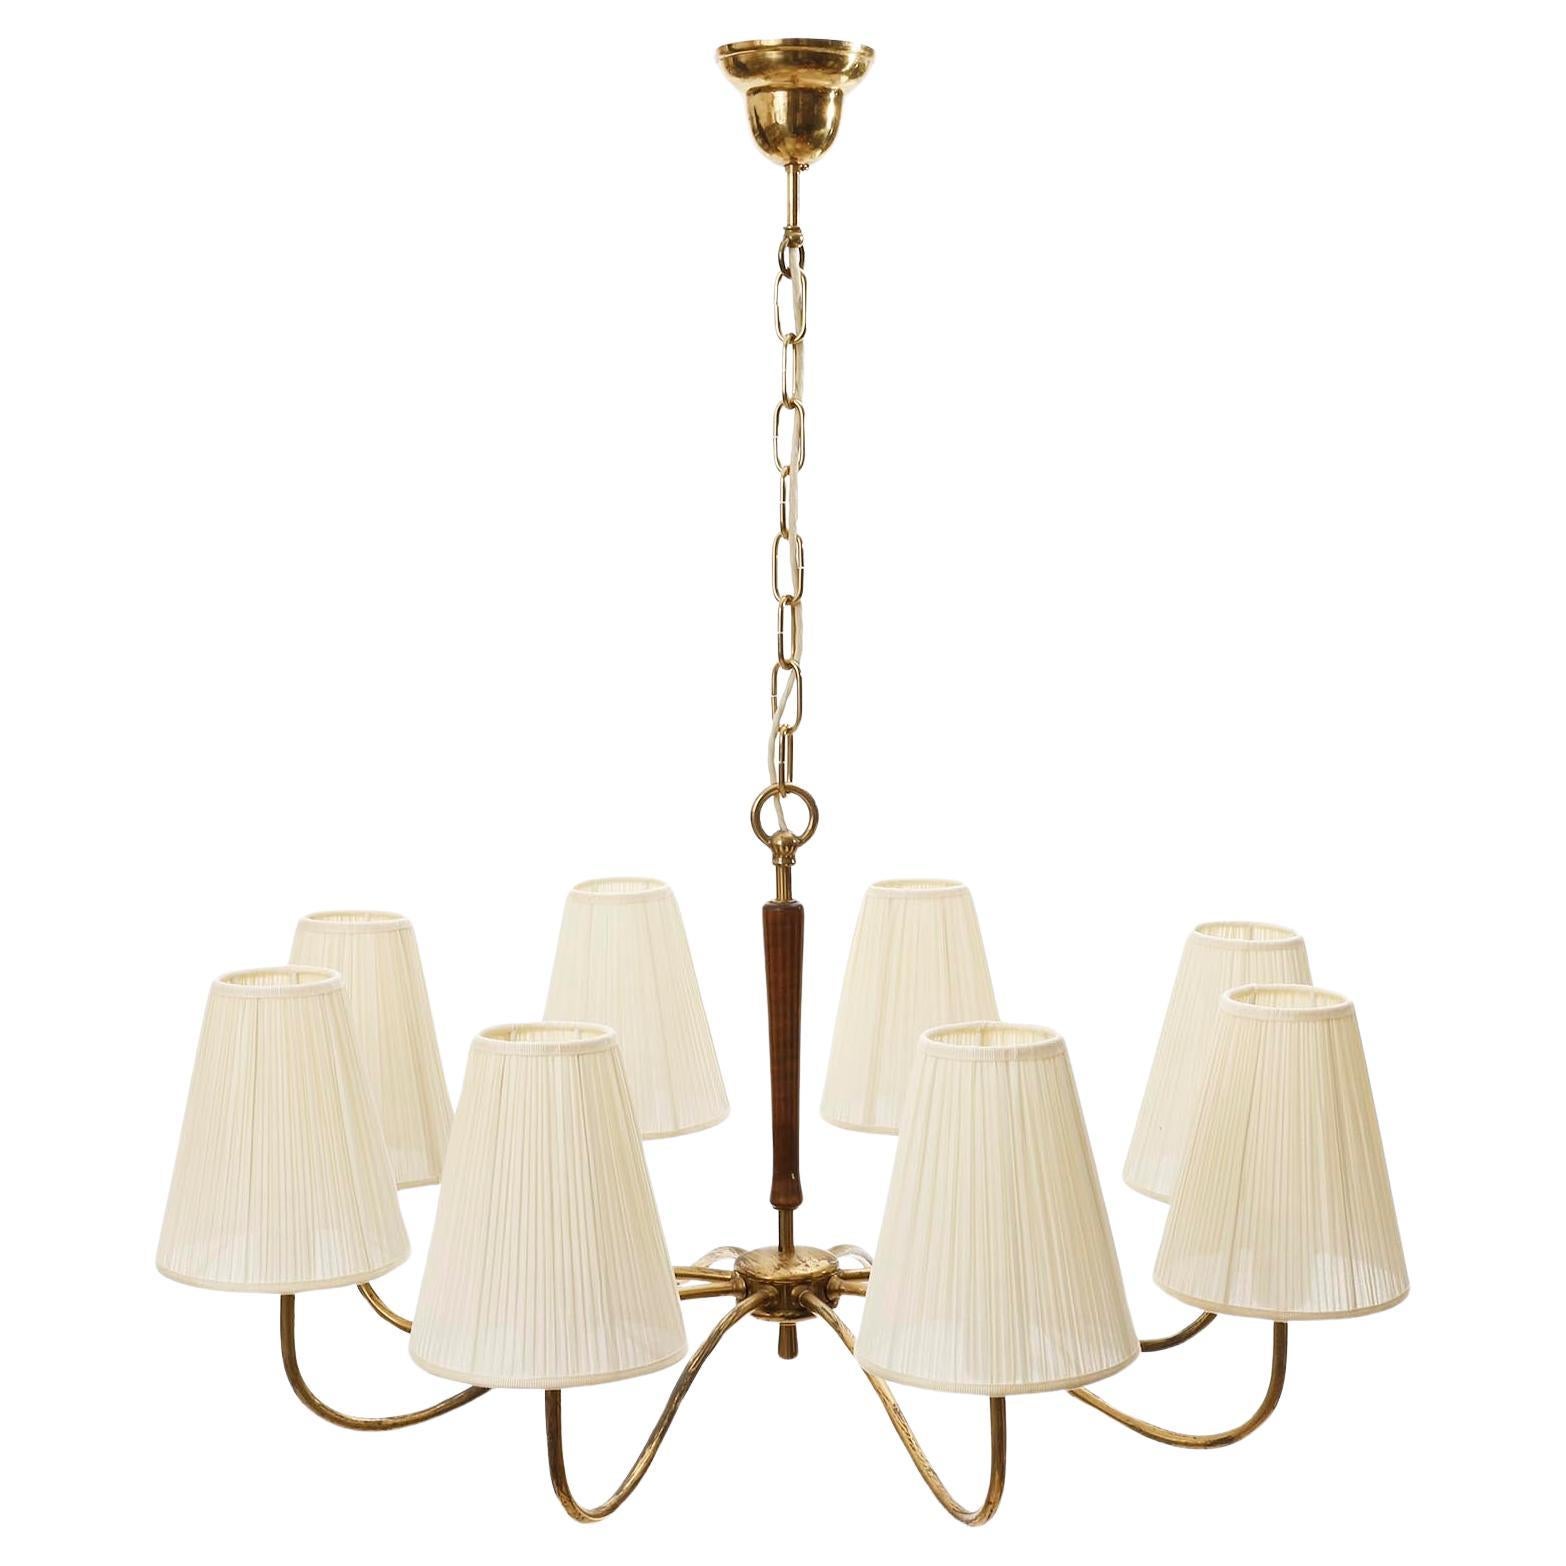 A fantastic eight-arm pendant chandelier made of stained wood and brass with organically curved arms and cream colored pleated fabric shades, manufactured in Austria in 1930s.
The brass parts have lovely patina and a warm aged hue. The lamp shades